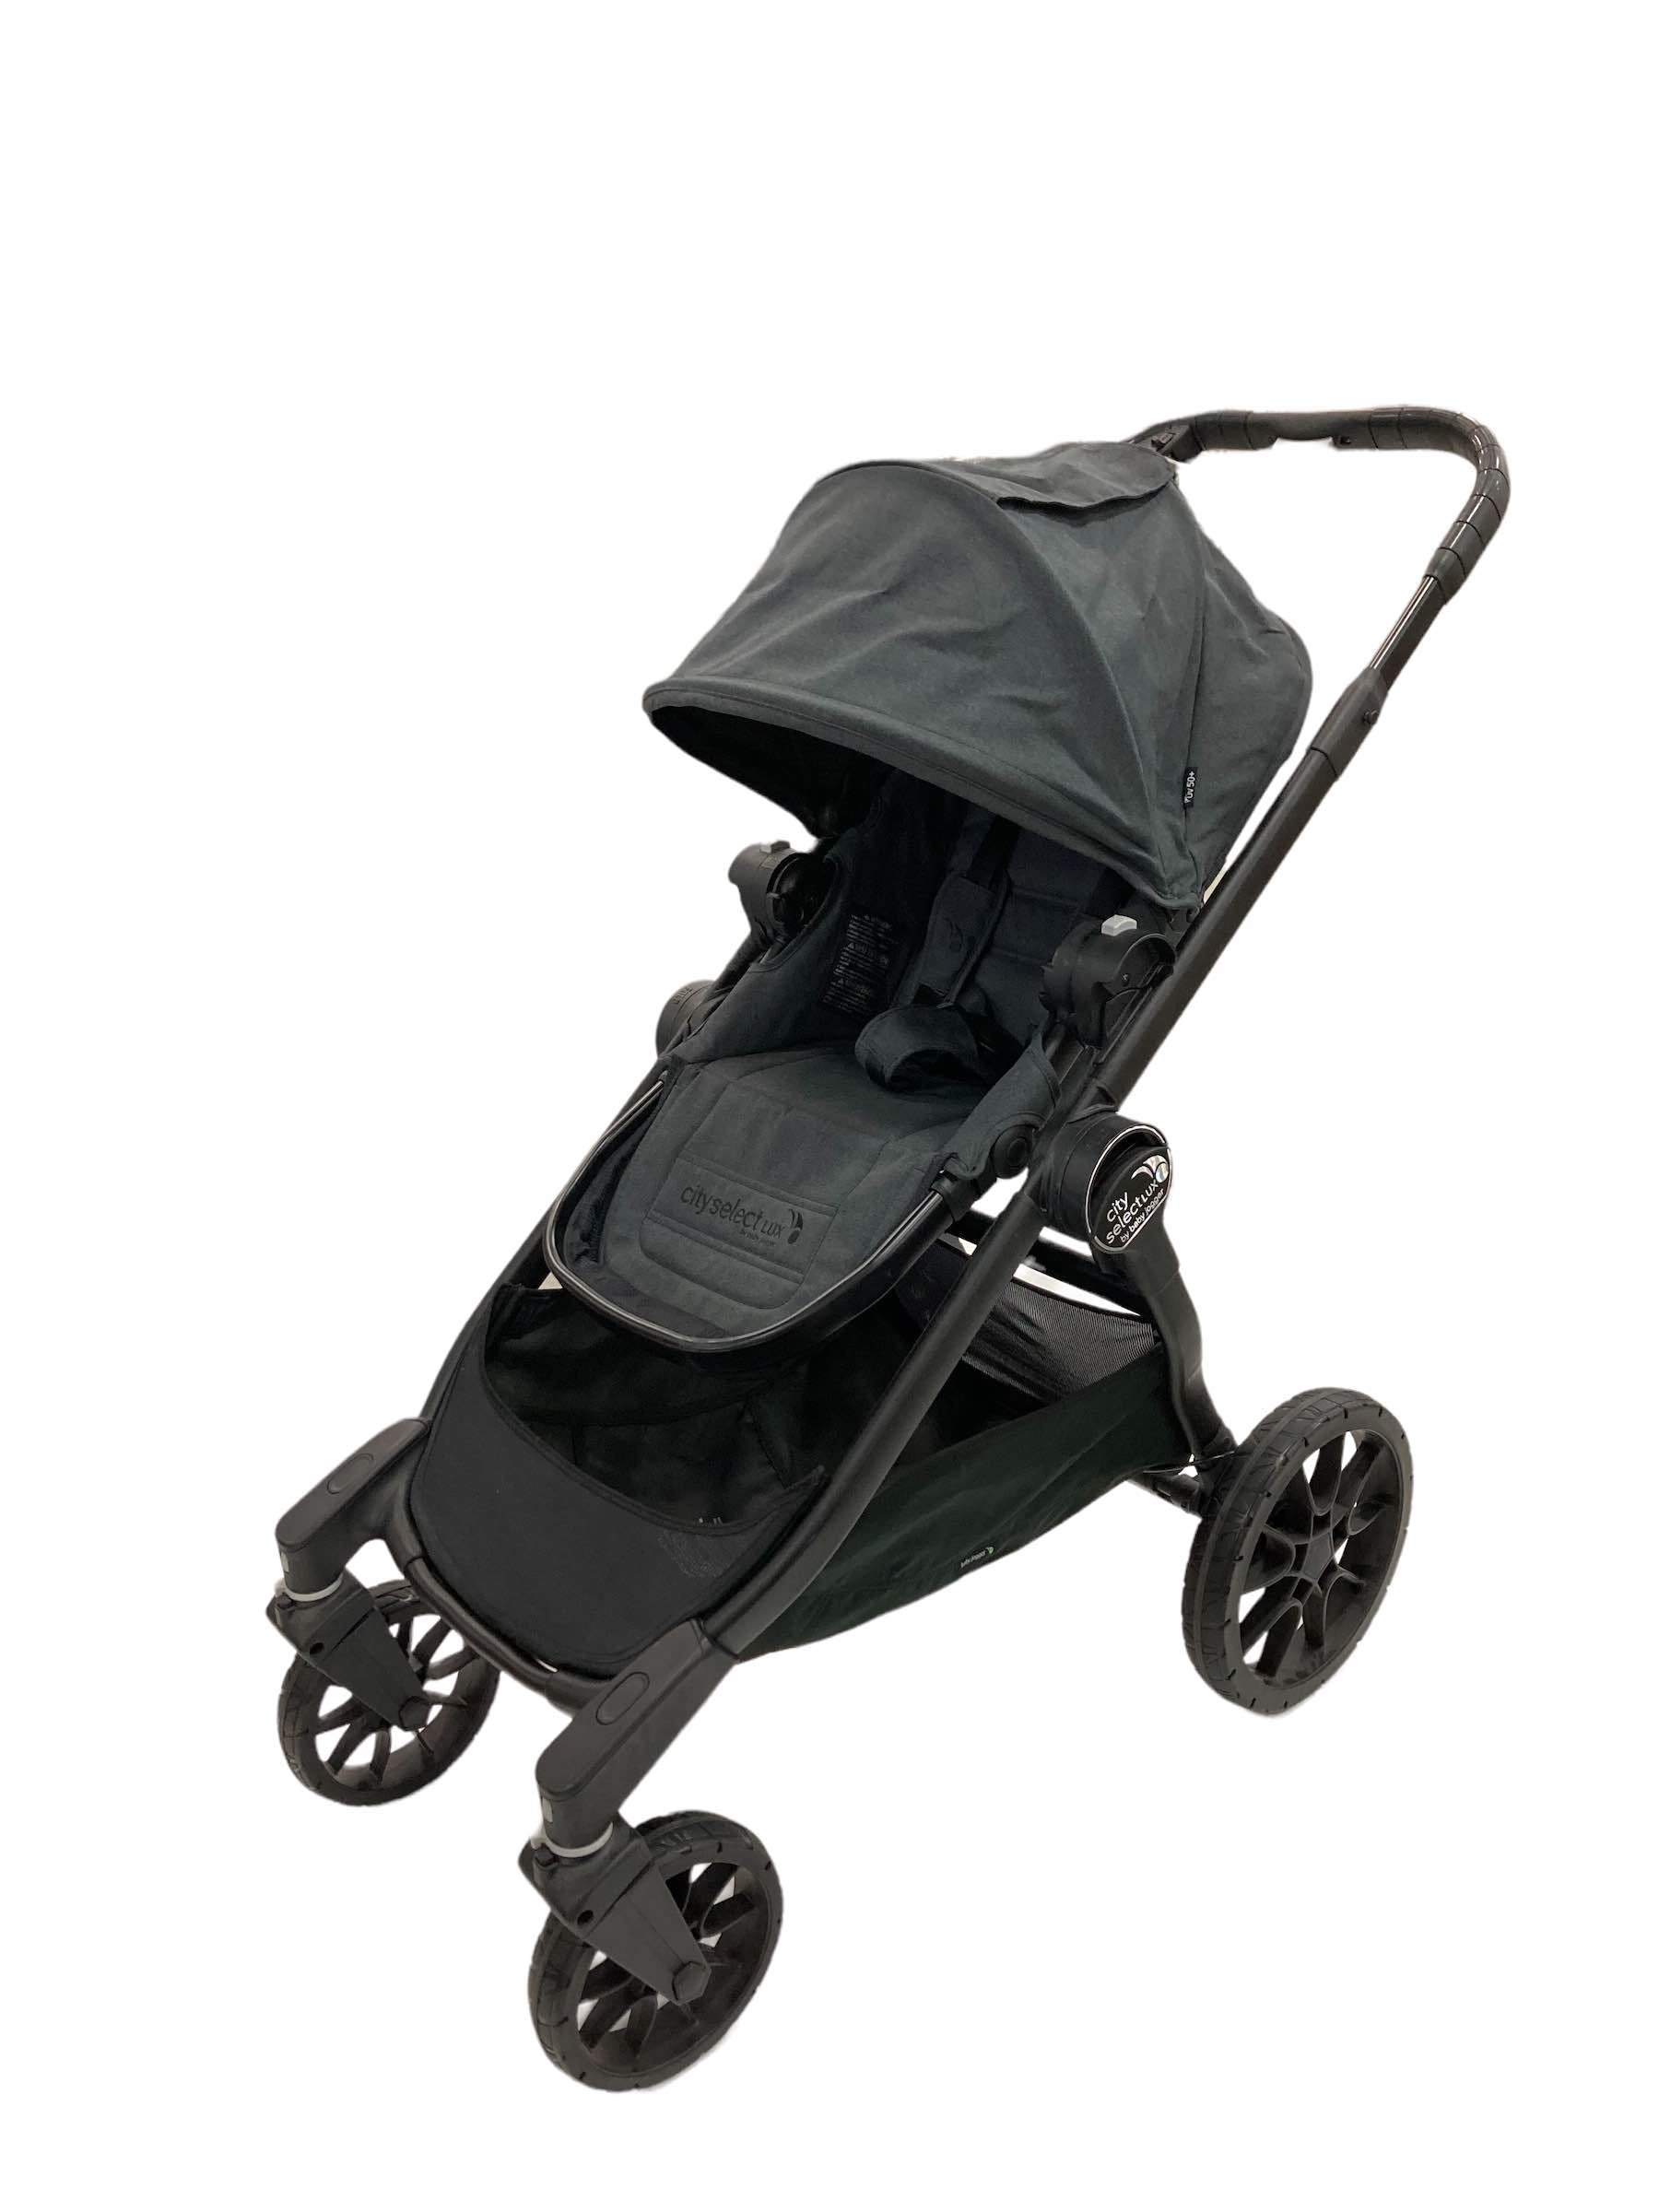 Baby City Select Stroller, 2017